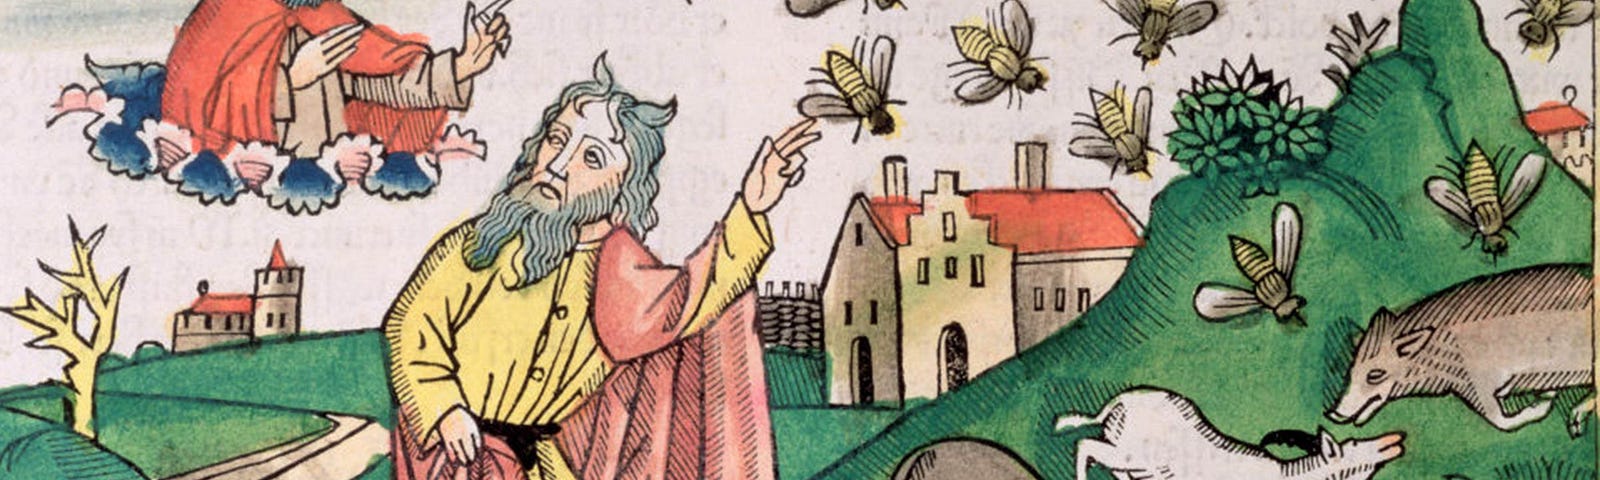 A copy of a 15th century German manuscript depicting the plague of insects.